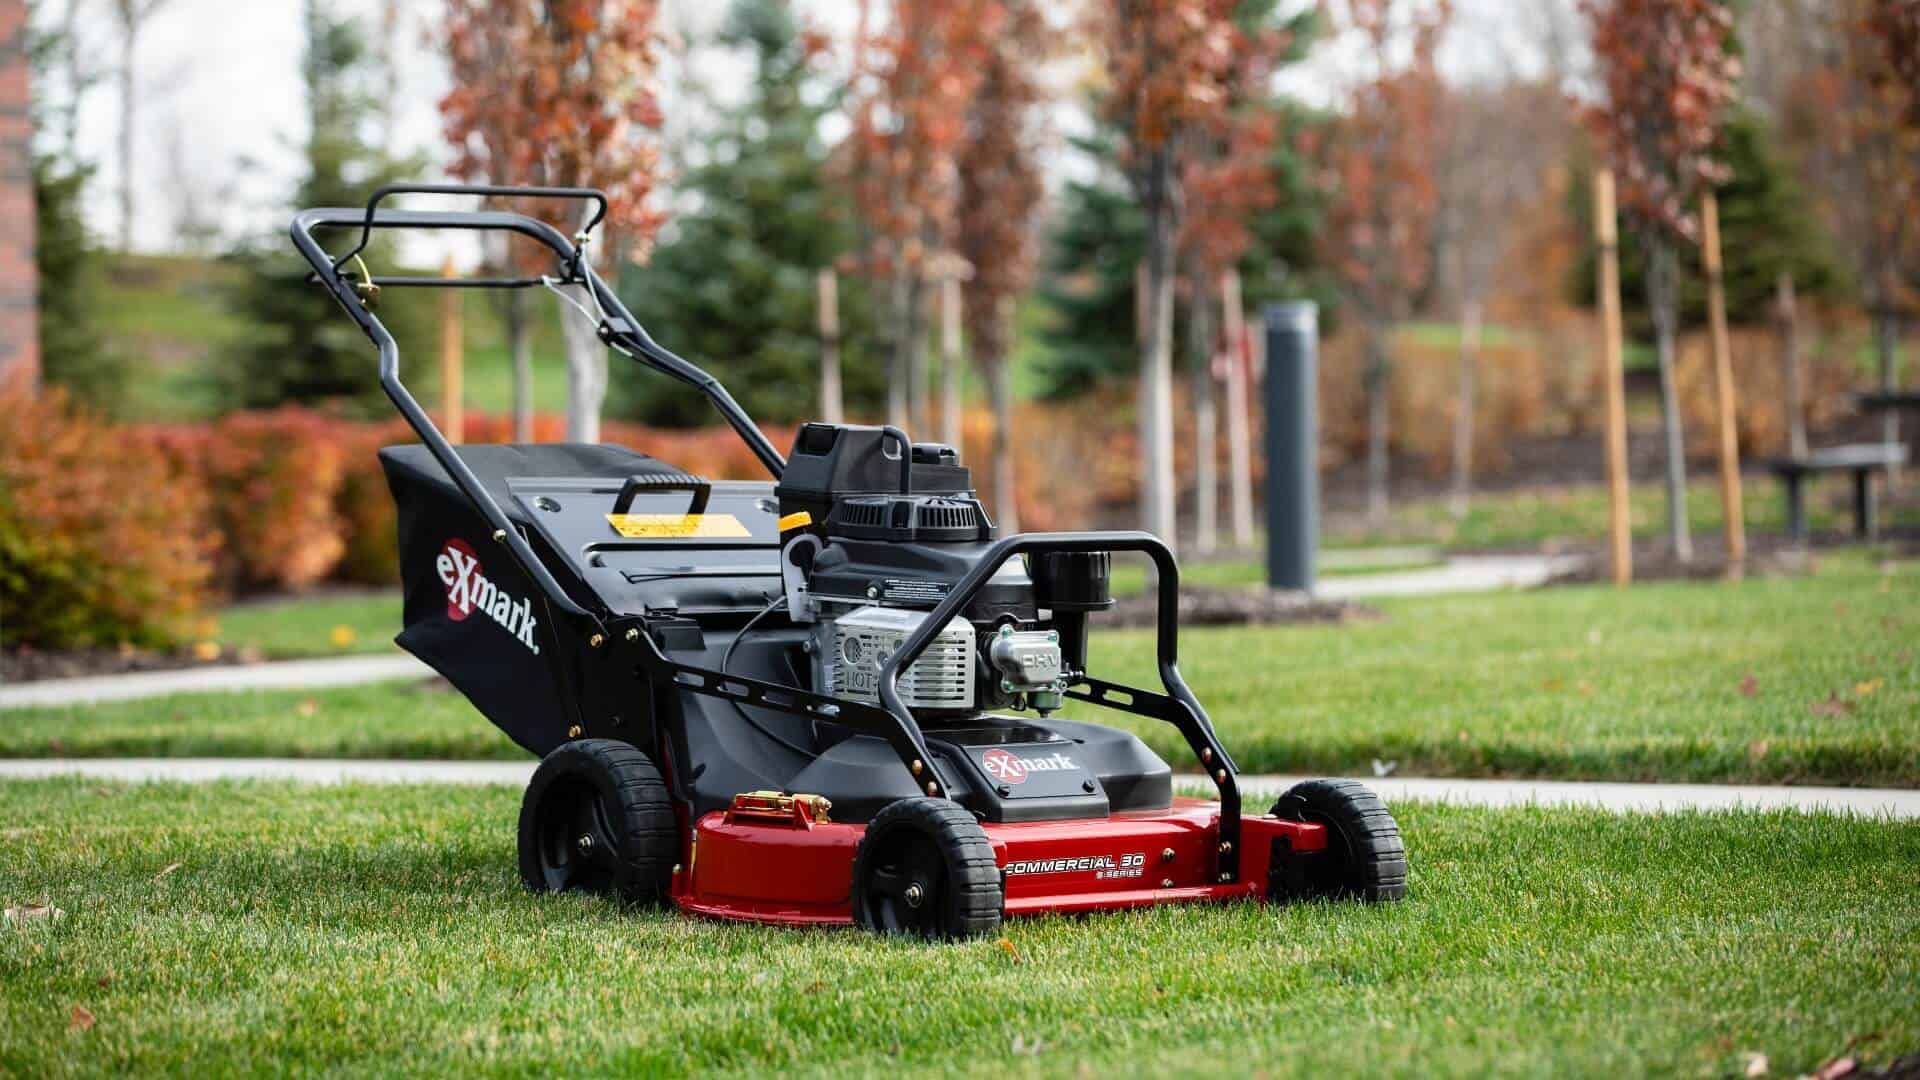 Exmark mower at the end of the season, ready for fall mower maintenance and winterizing